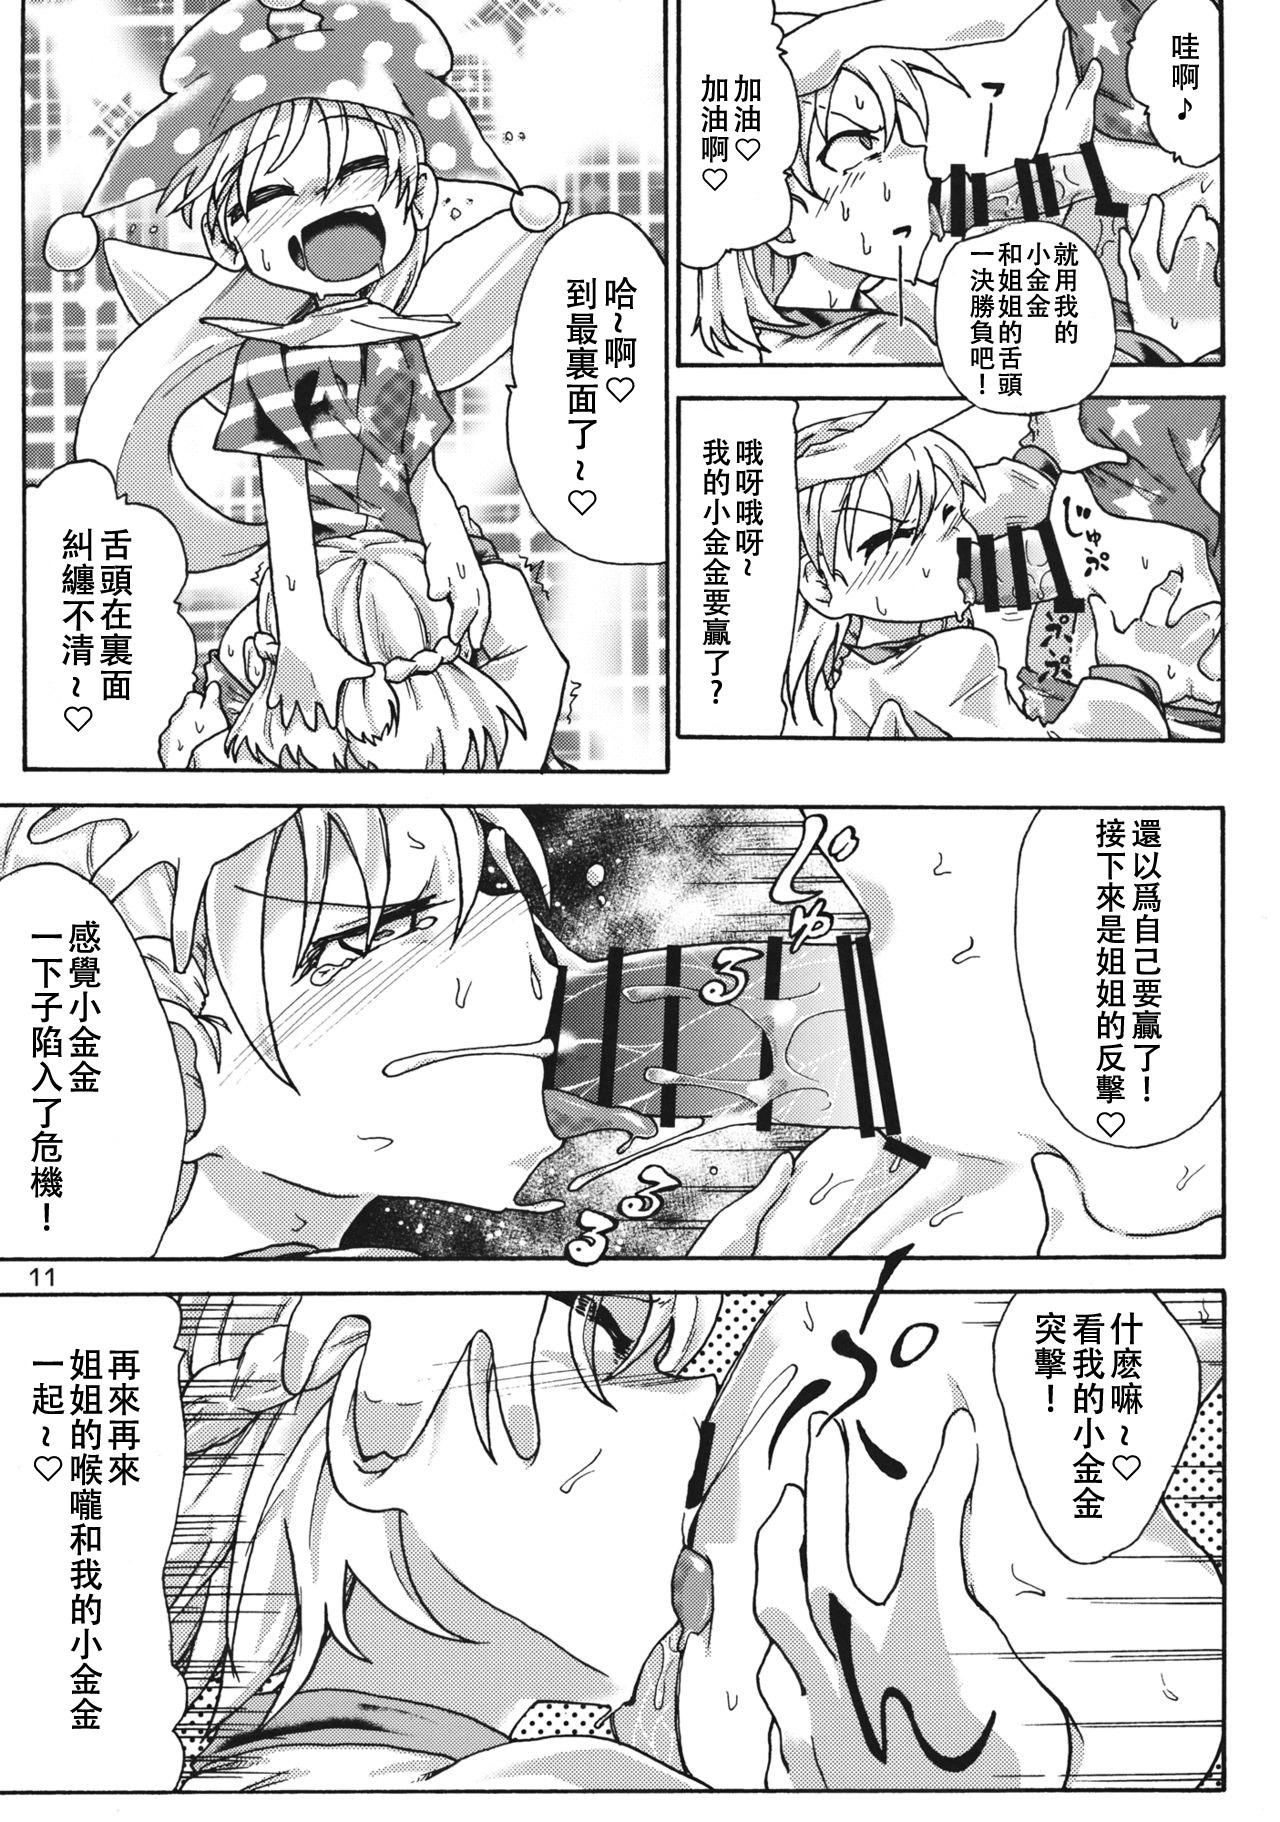 Foot Creeping! - Touhou project Hot Whores - Page 10